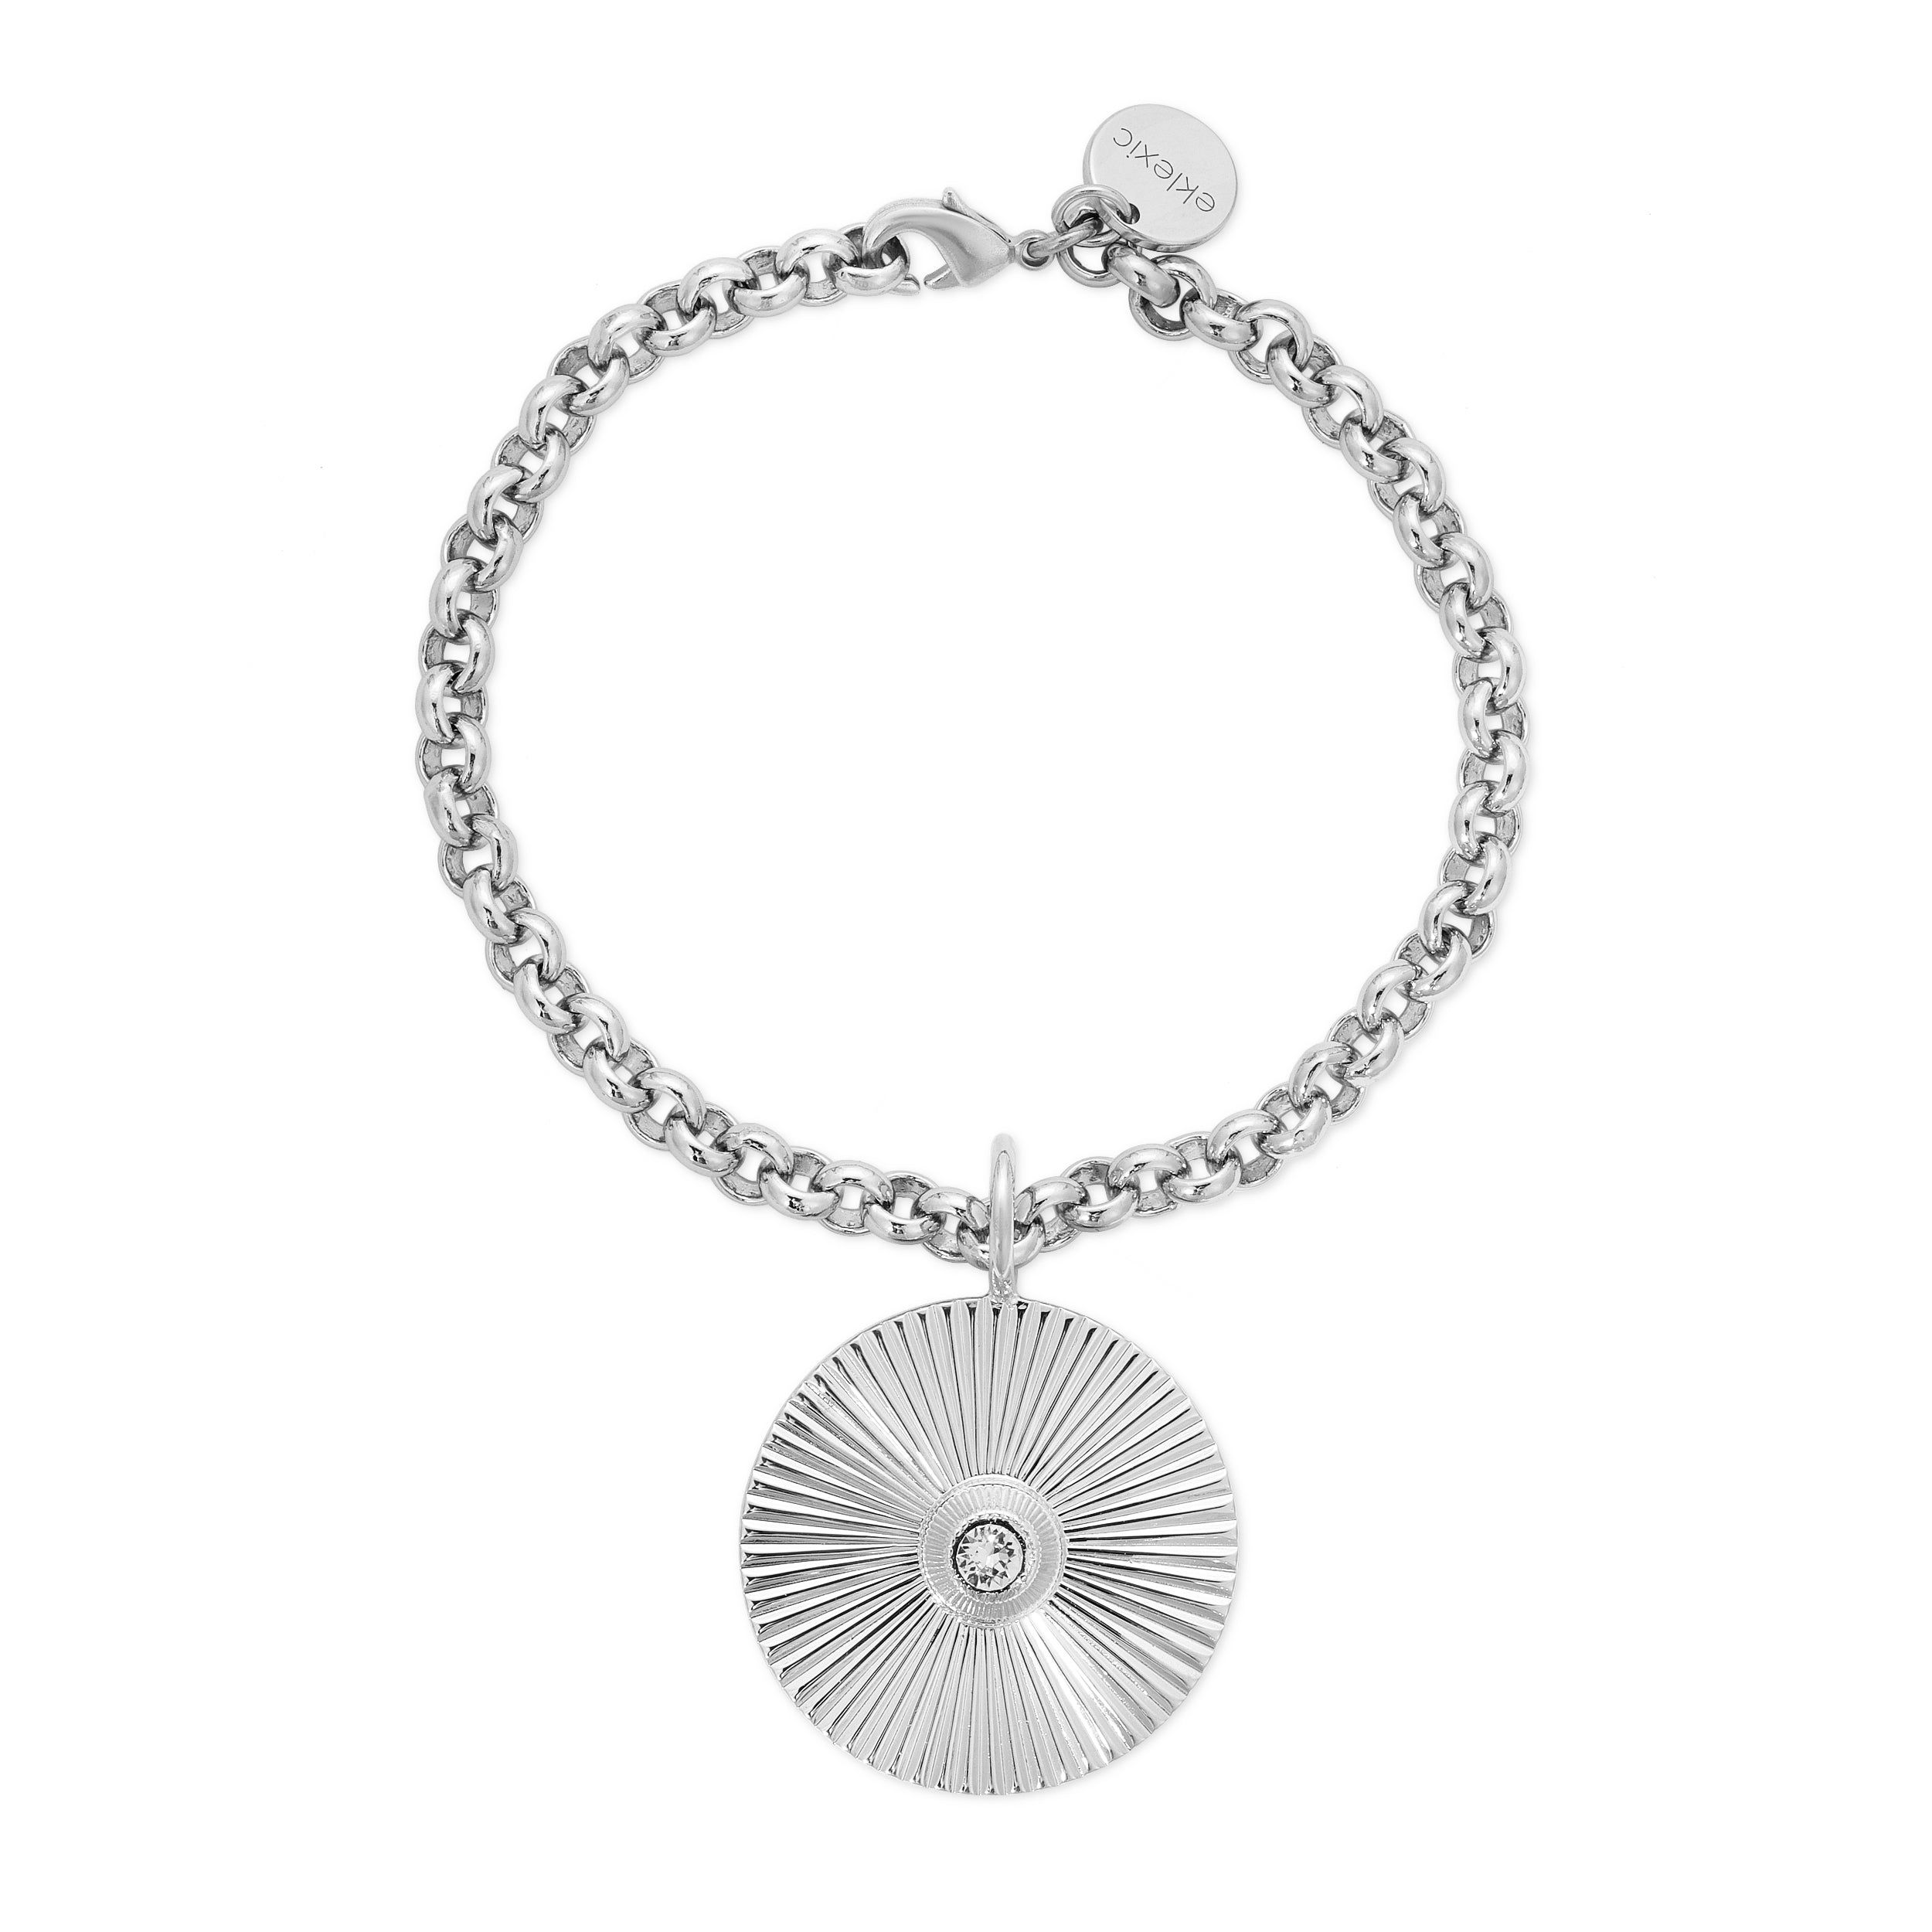 a silver bracelet with a disc charm